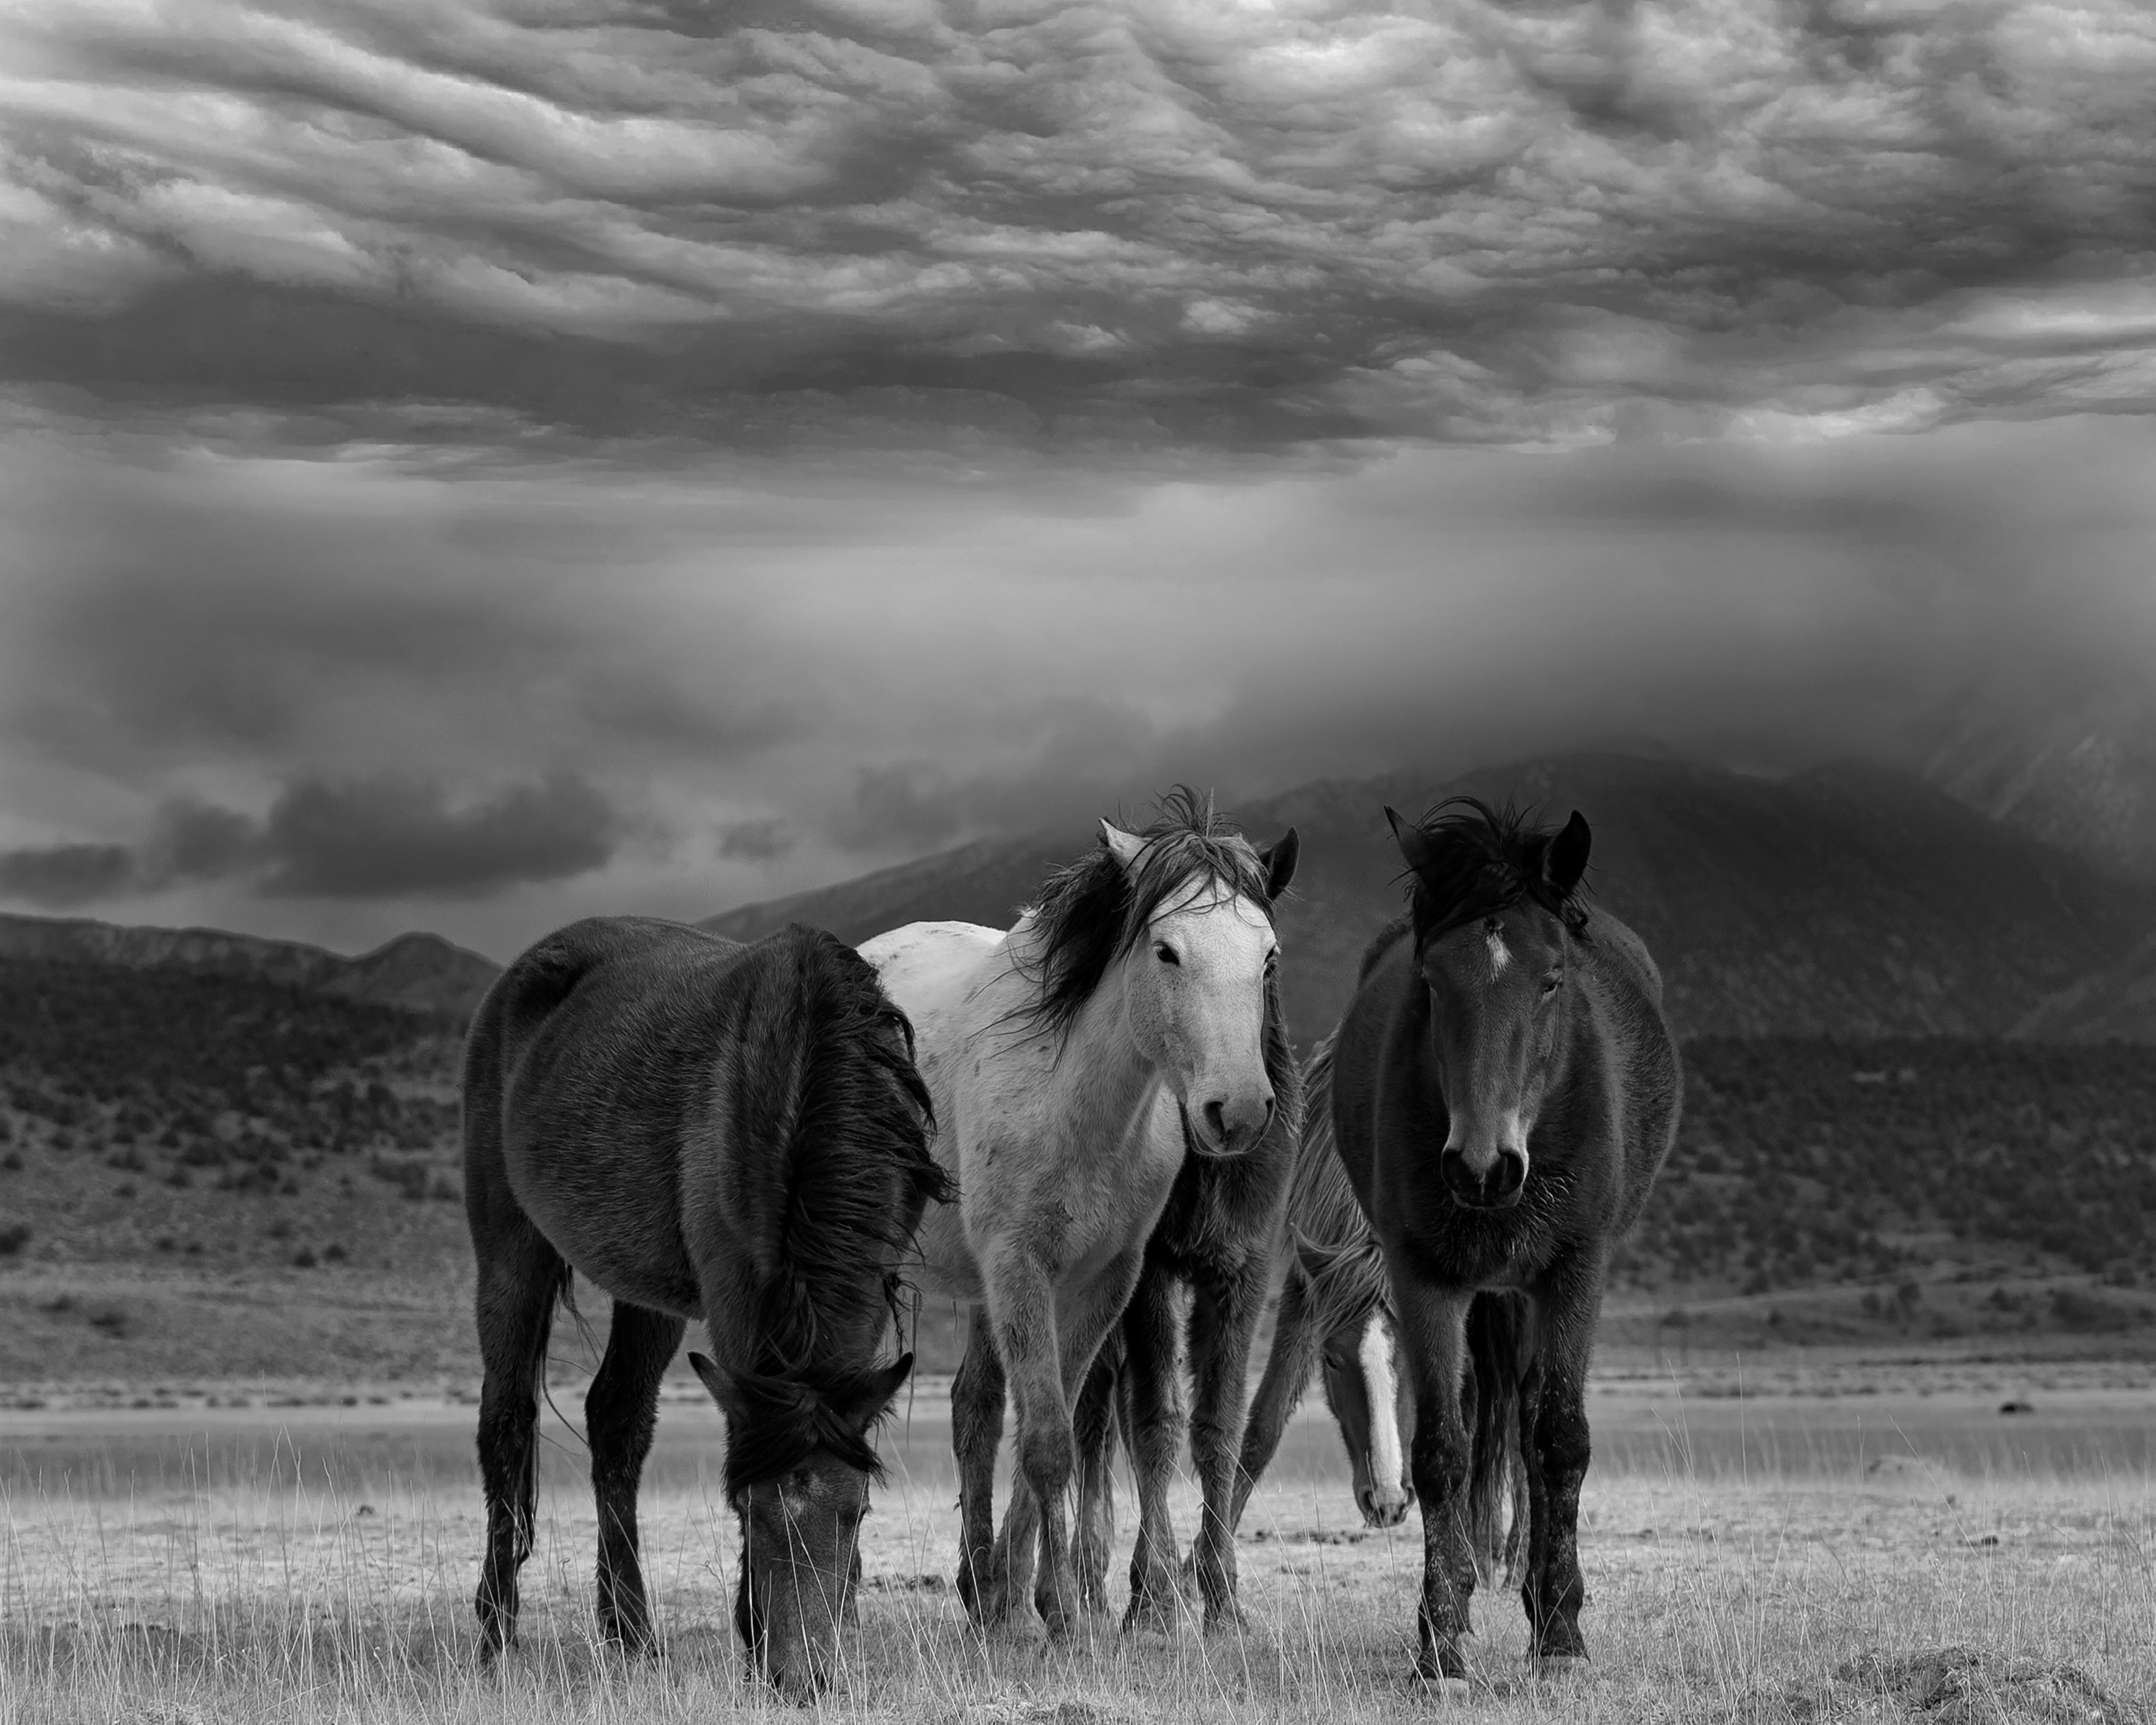 Shane Russeck Animal Print - Black and White Photography Wild Horses Mustangs Dust and Horses 40x50, Unsigned